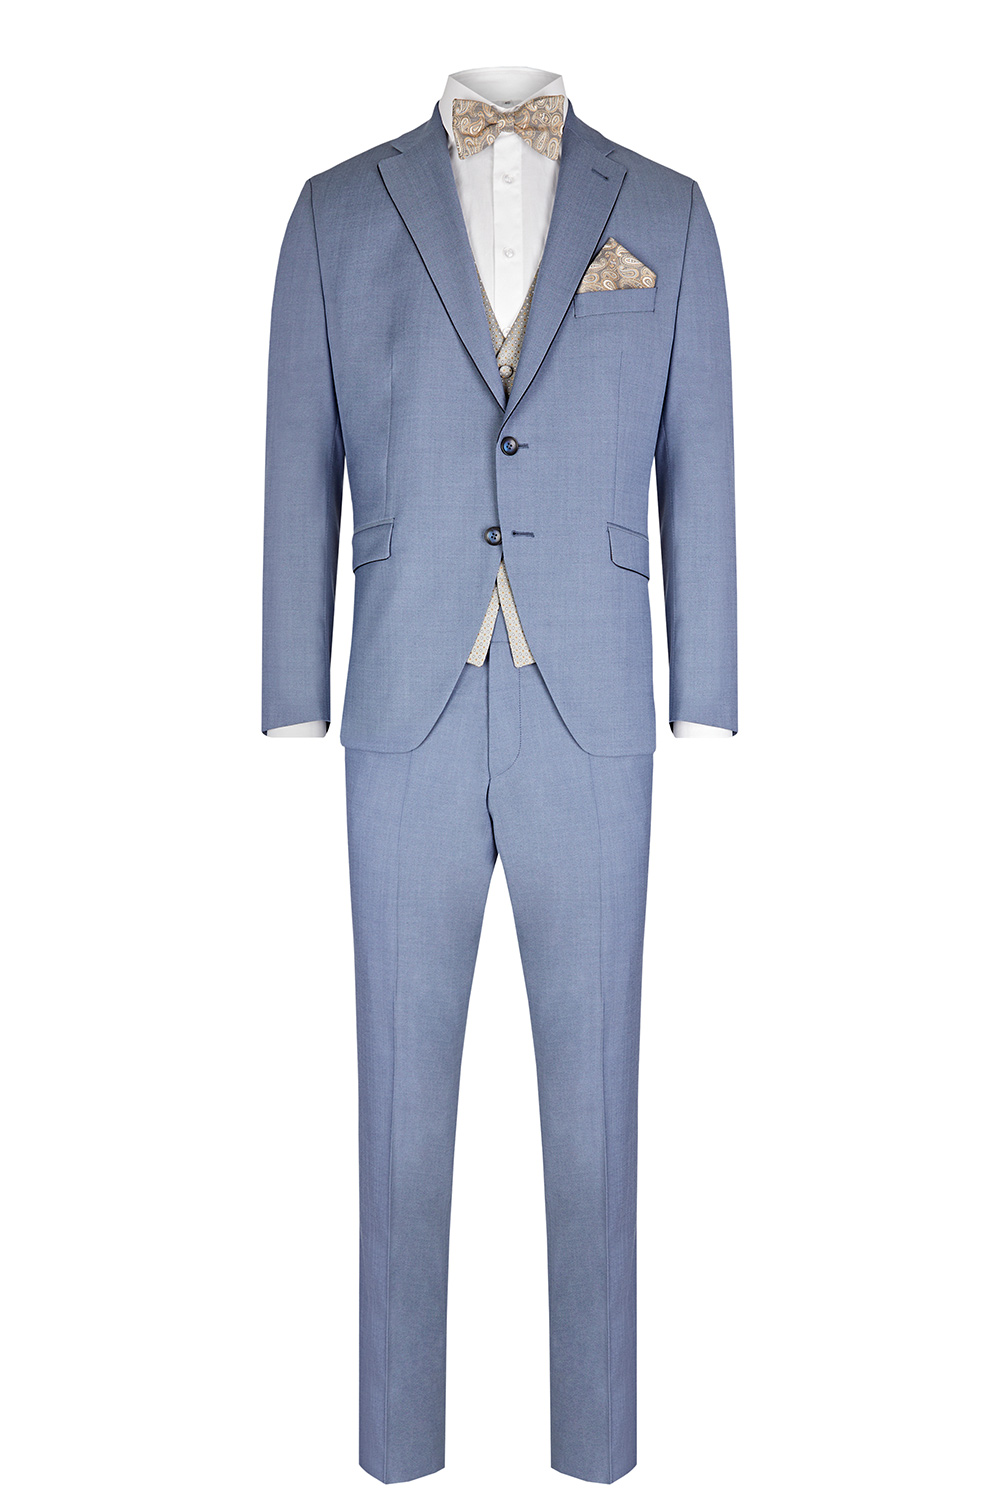 Blue 3 piece Wedding Suit - Tom Murphy's Formal and Menswear